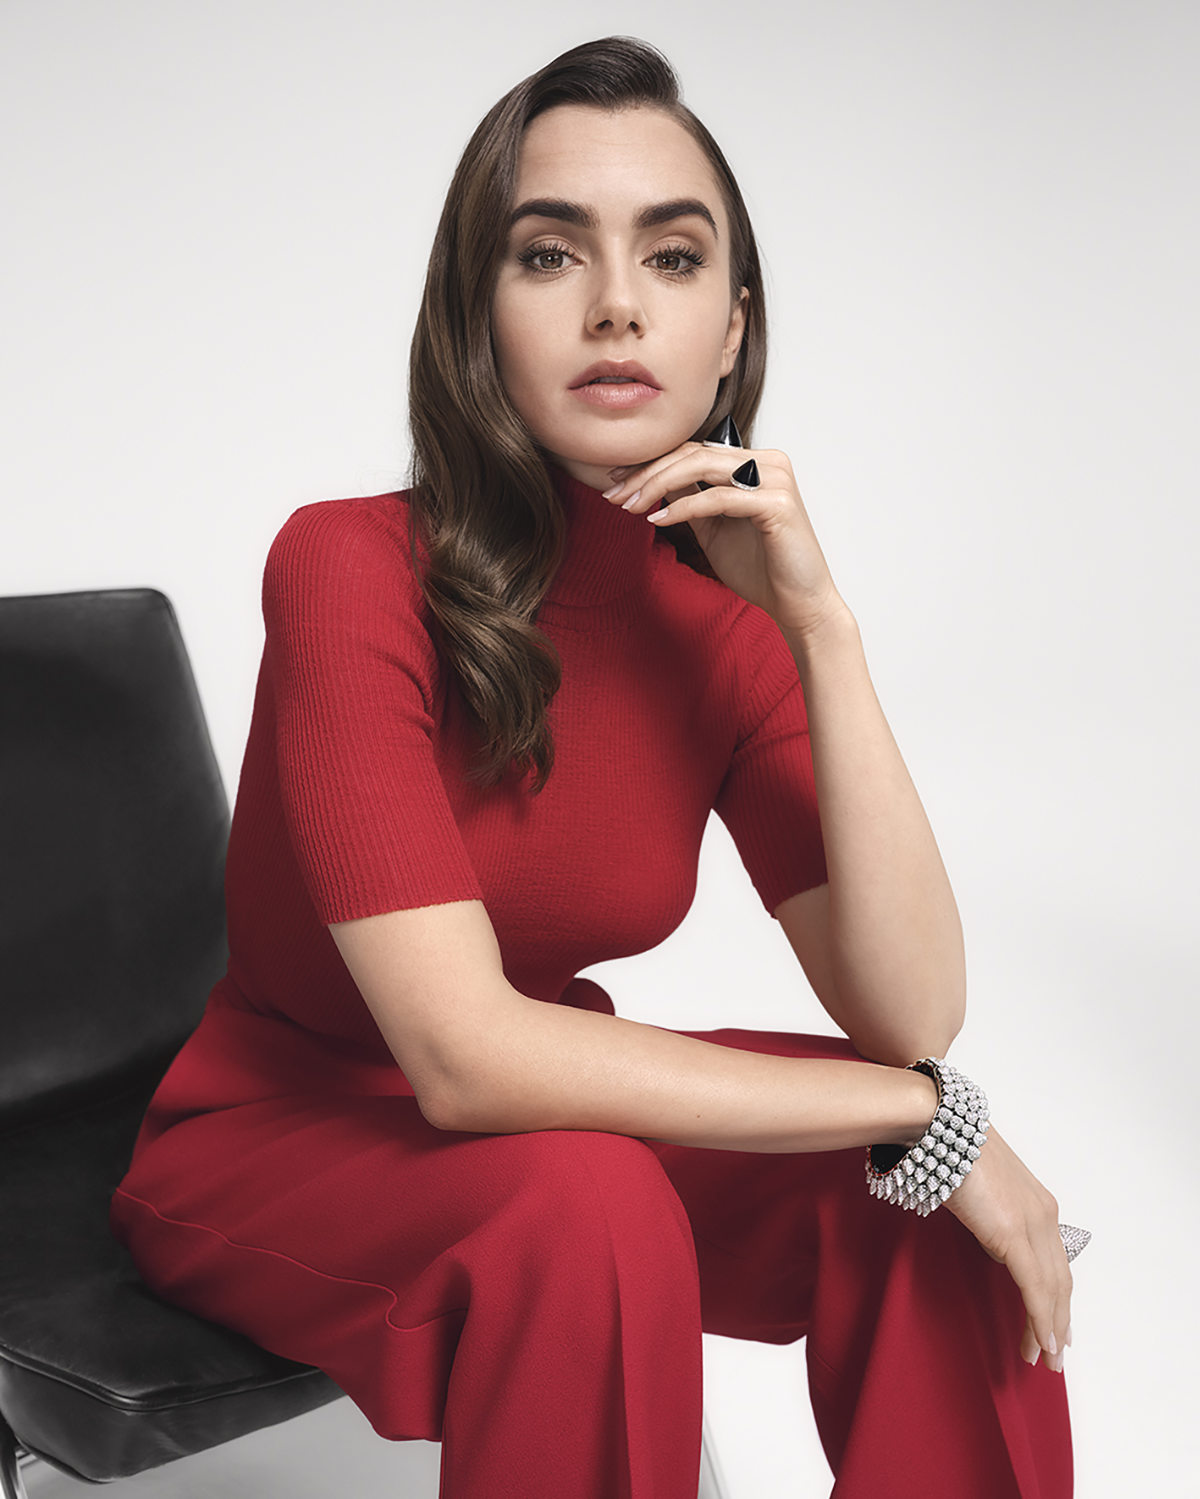 Lily Collins Is The Face Of The Clash [Un]Limited Jewellery Collection And Double C De Cartier Bag.